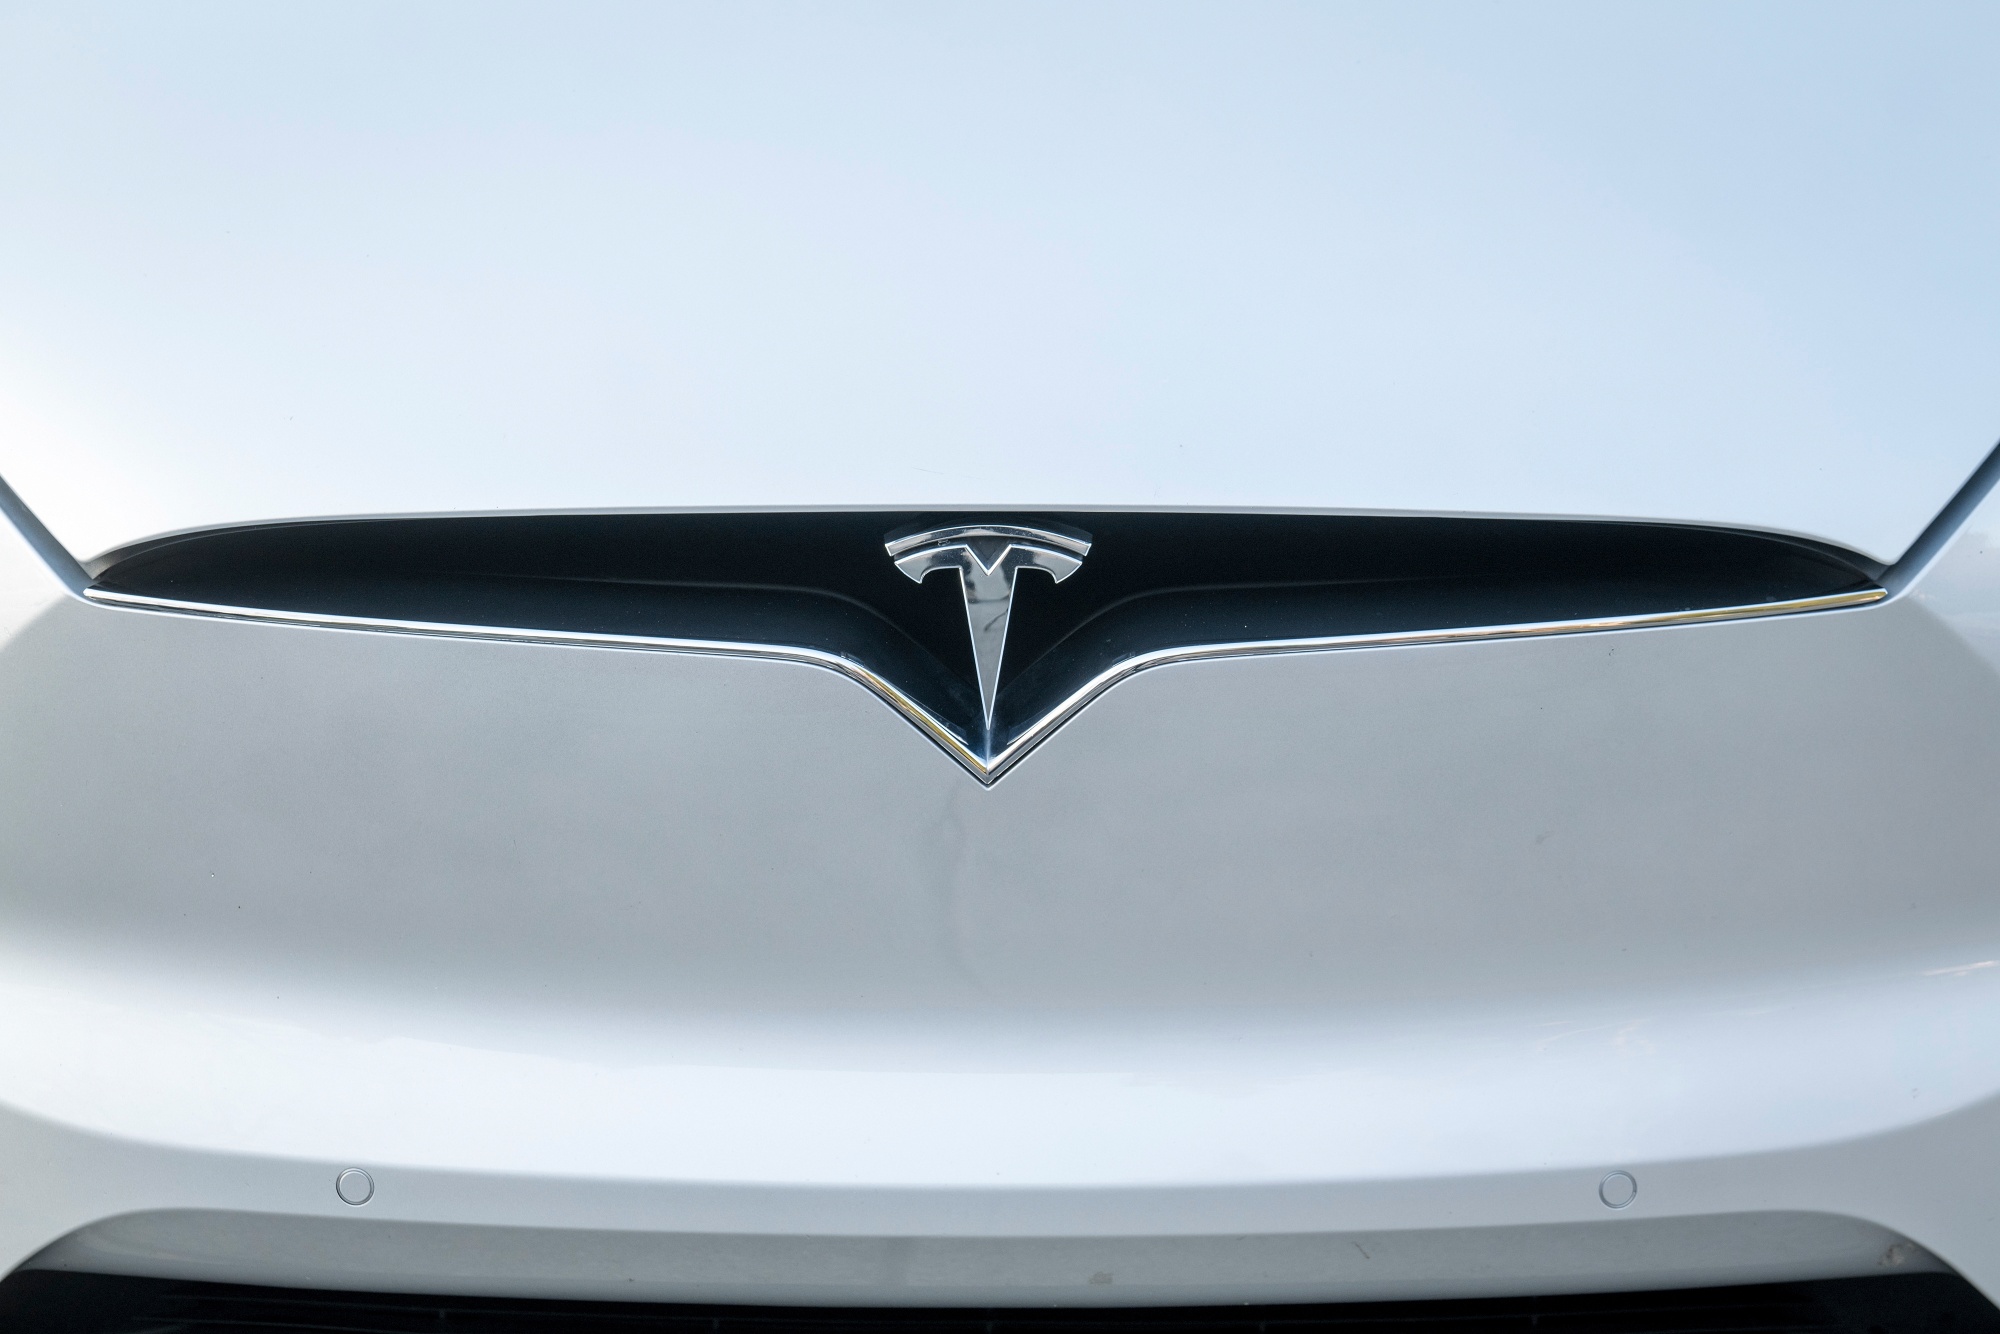 Tesla's Patient Superfans Are Willing To Pay Up For Solar Roofs